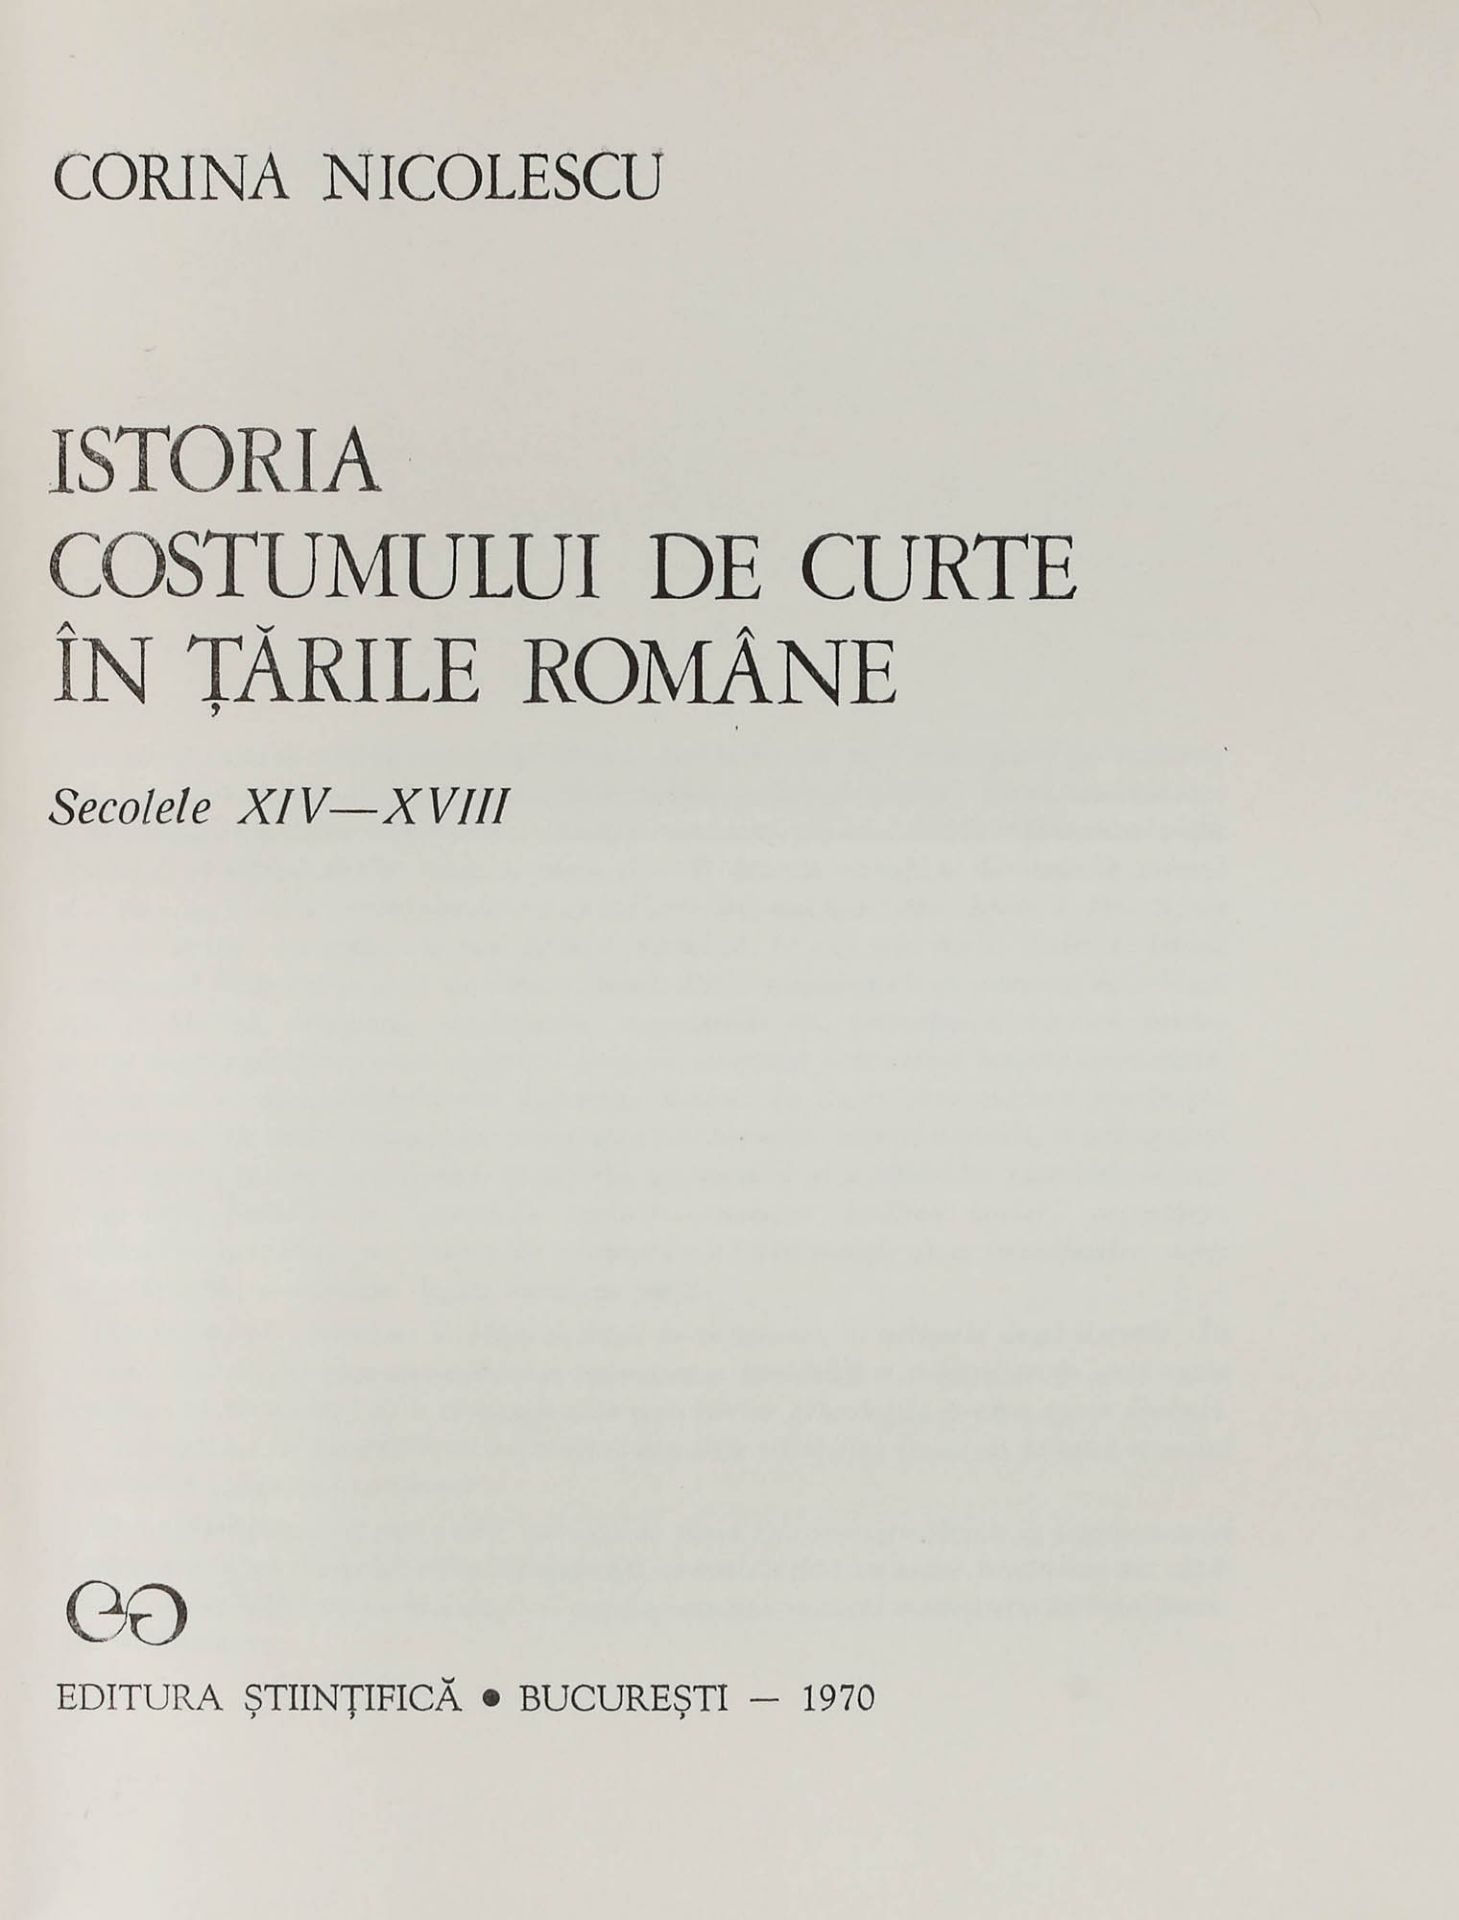 "The history of the court dress in the Romanian Countries", by Corina Nicolescu, Bucharest, 1970 - Image 2 of 6